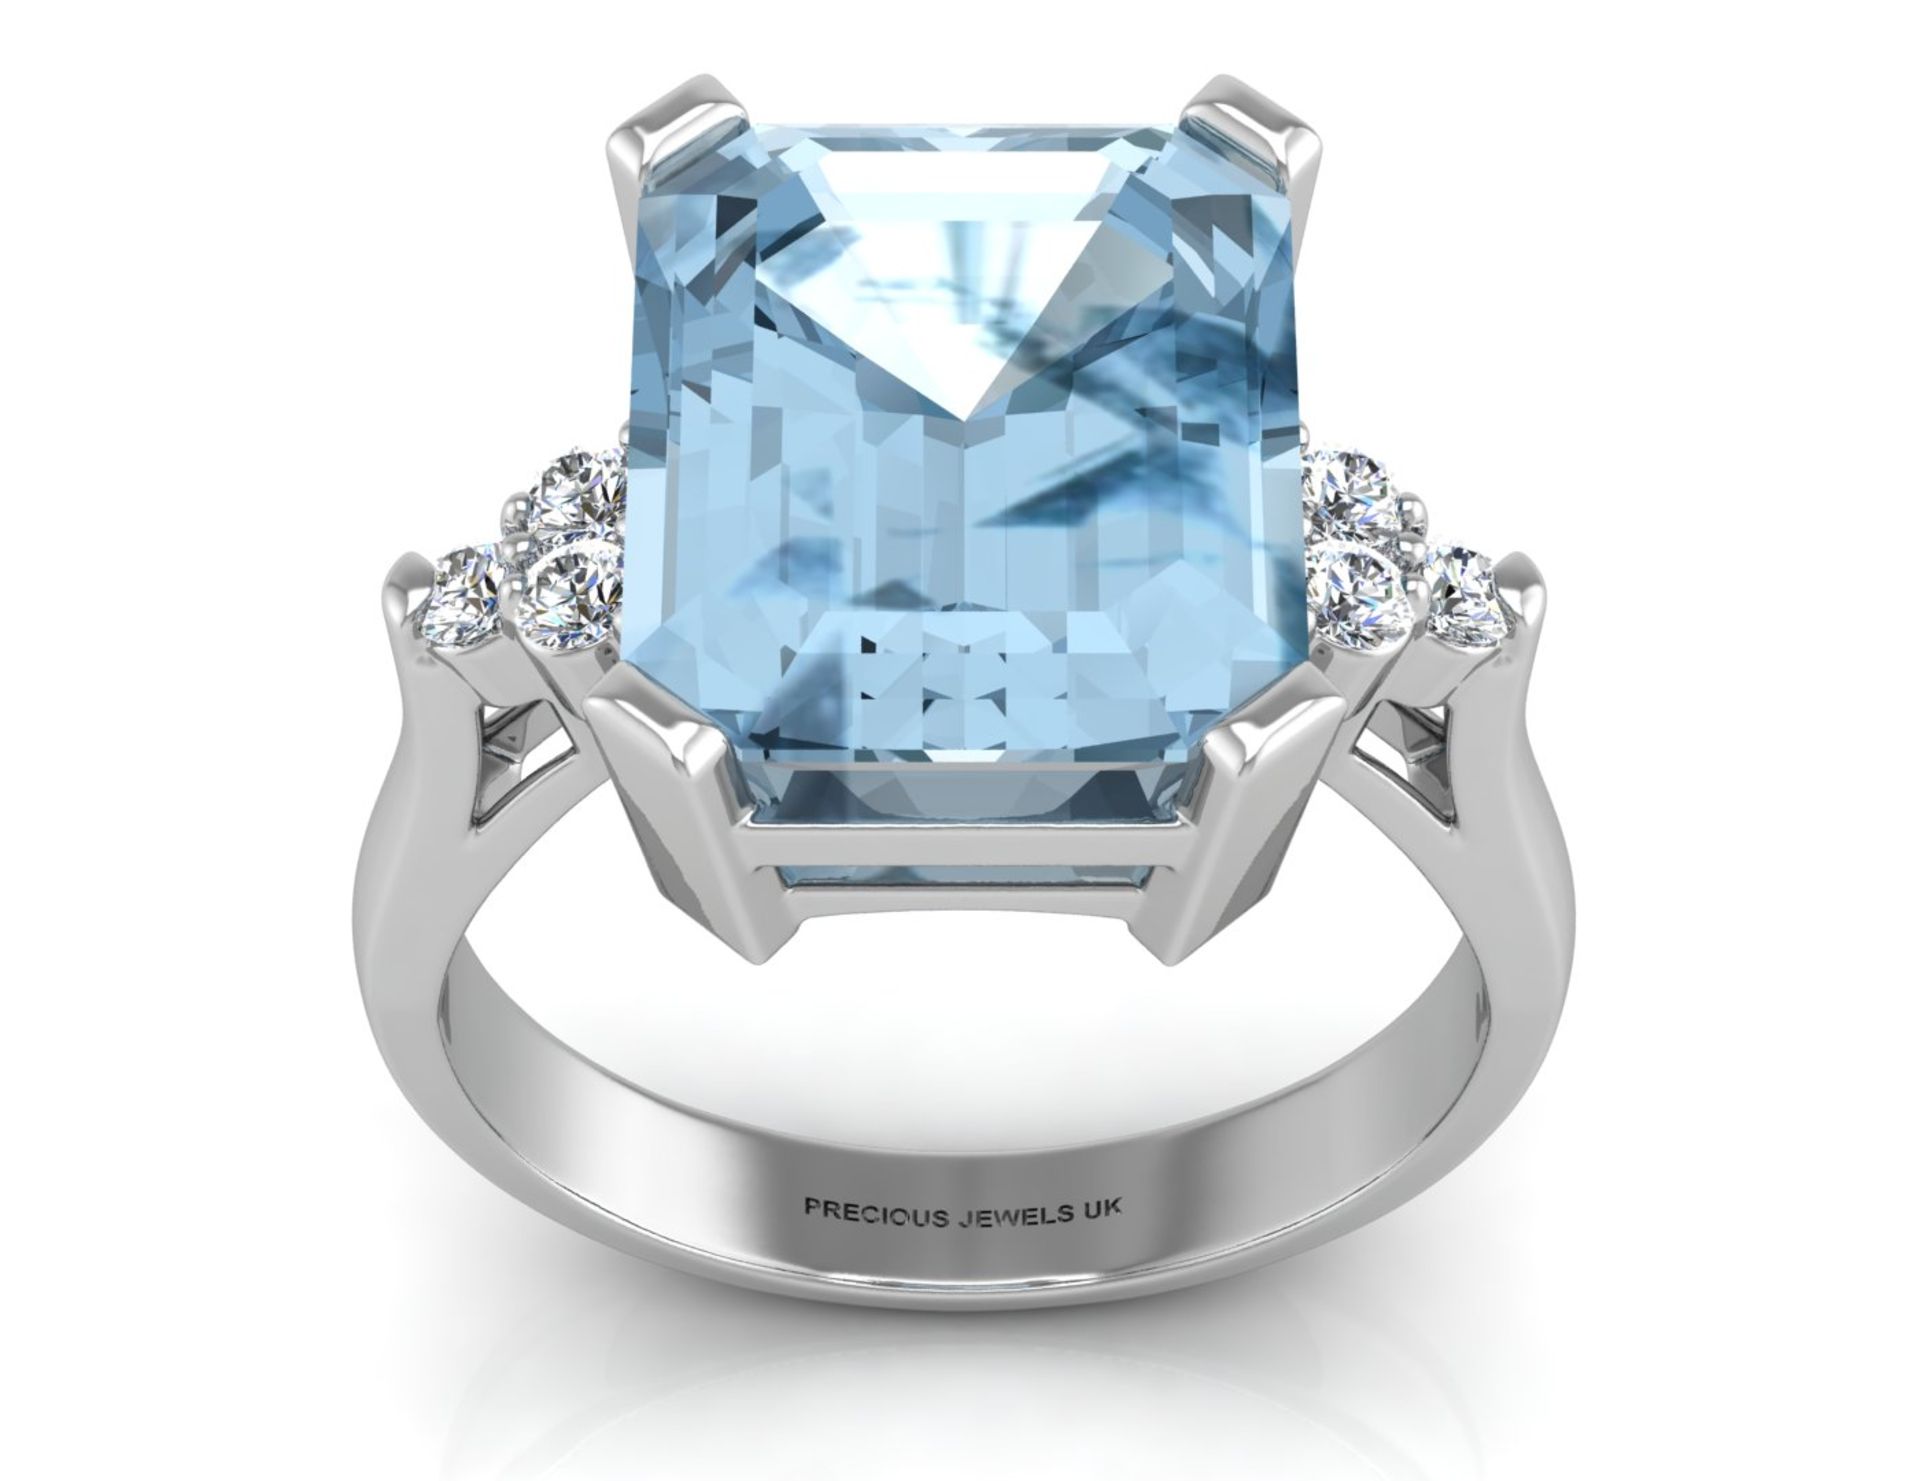 9ct White Gold Diamond And Blue Topaz Ring 0.18 Carats - Valued by GIE £3,995.00 - 9ct White Gold - Image 3 of 5